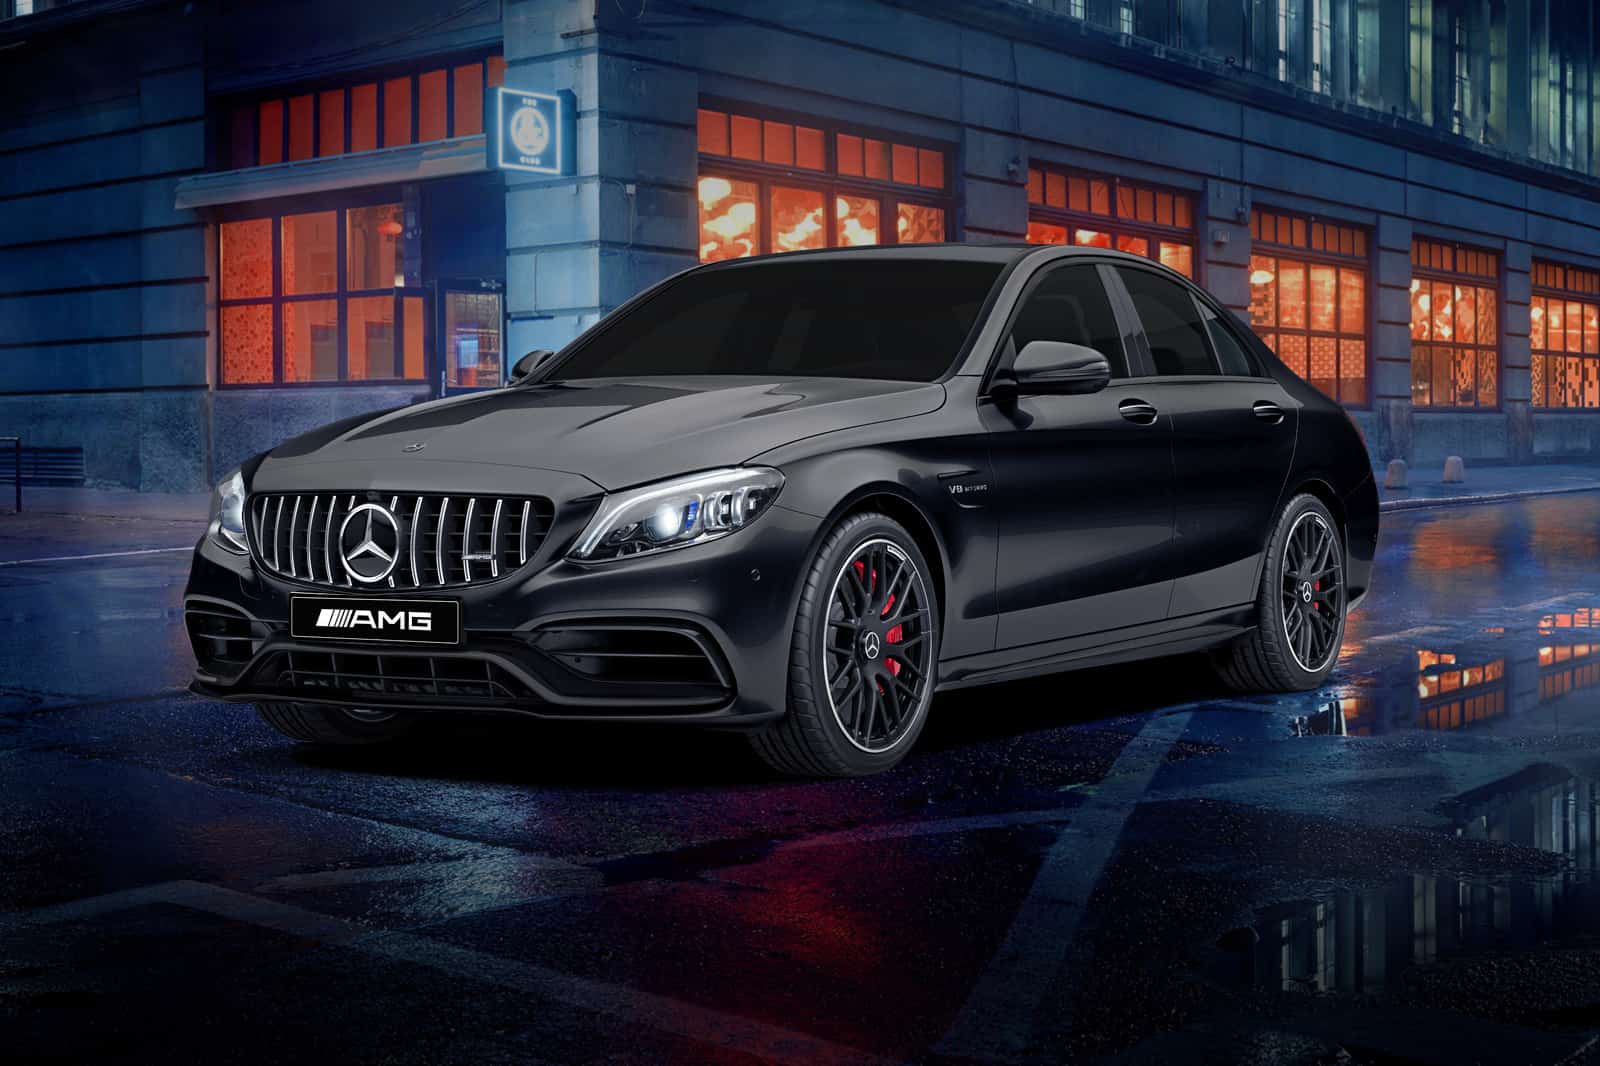 MS Limited Edition Draw 209 Mercedes-AMG